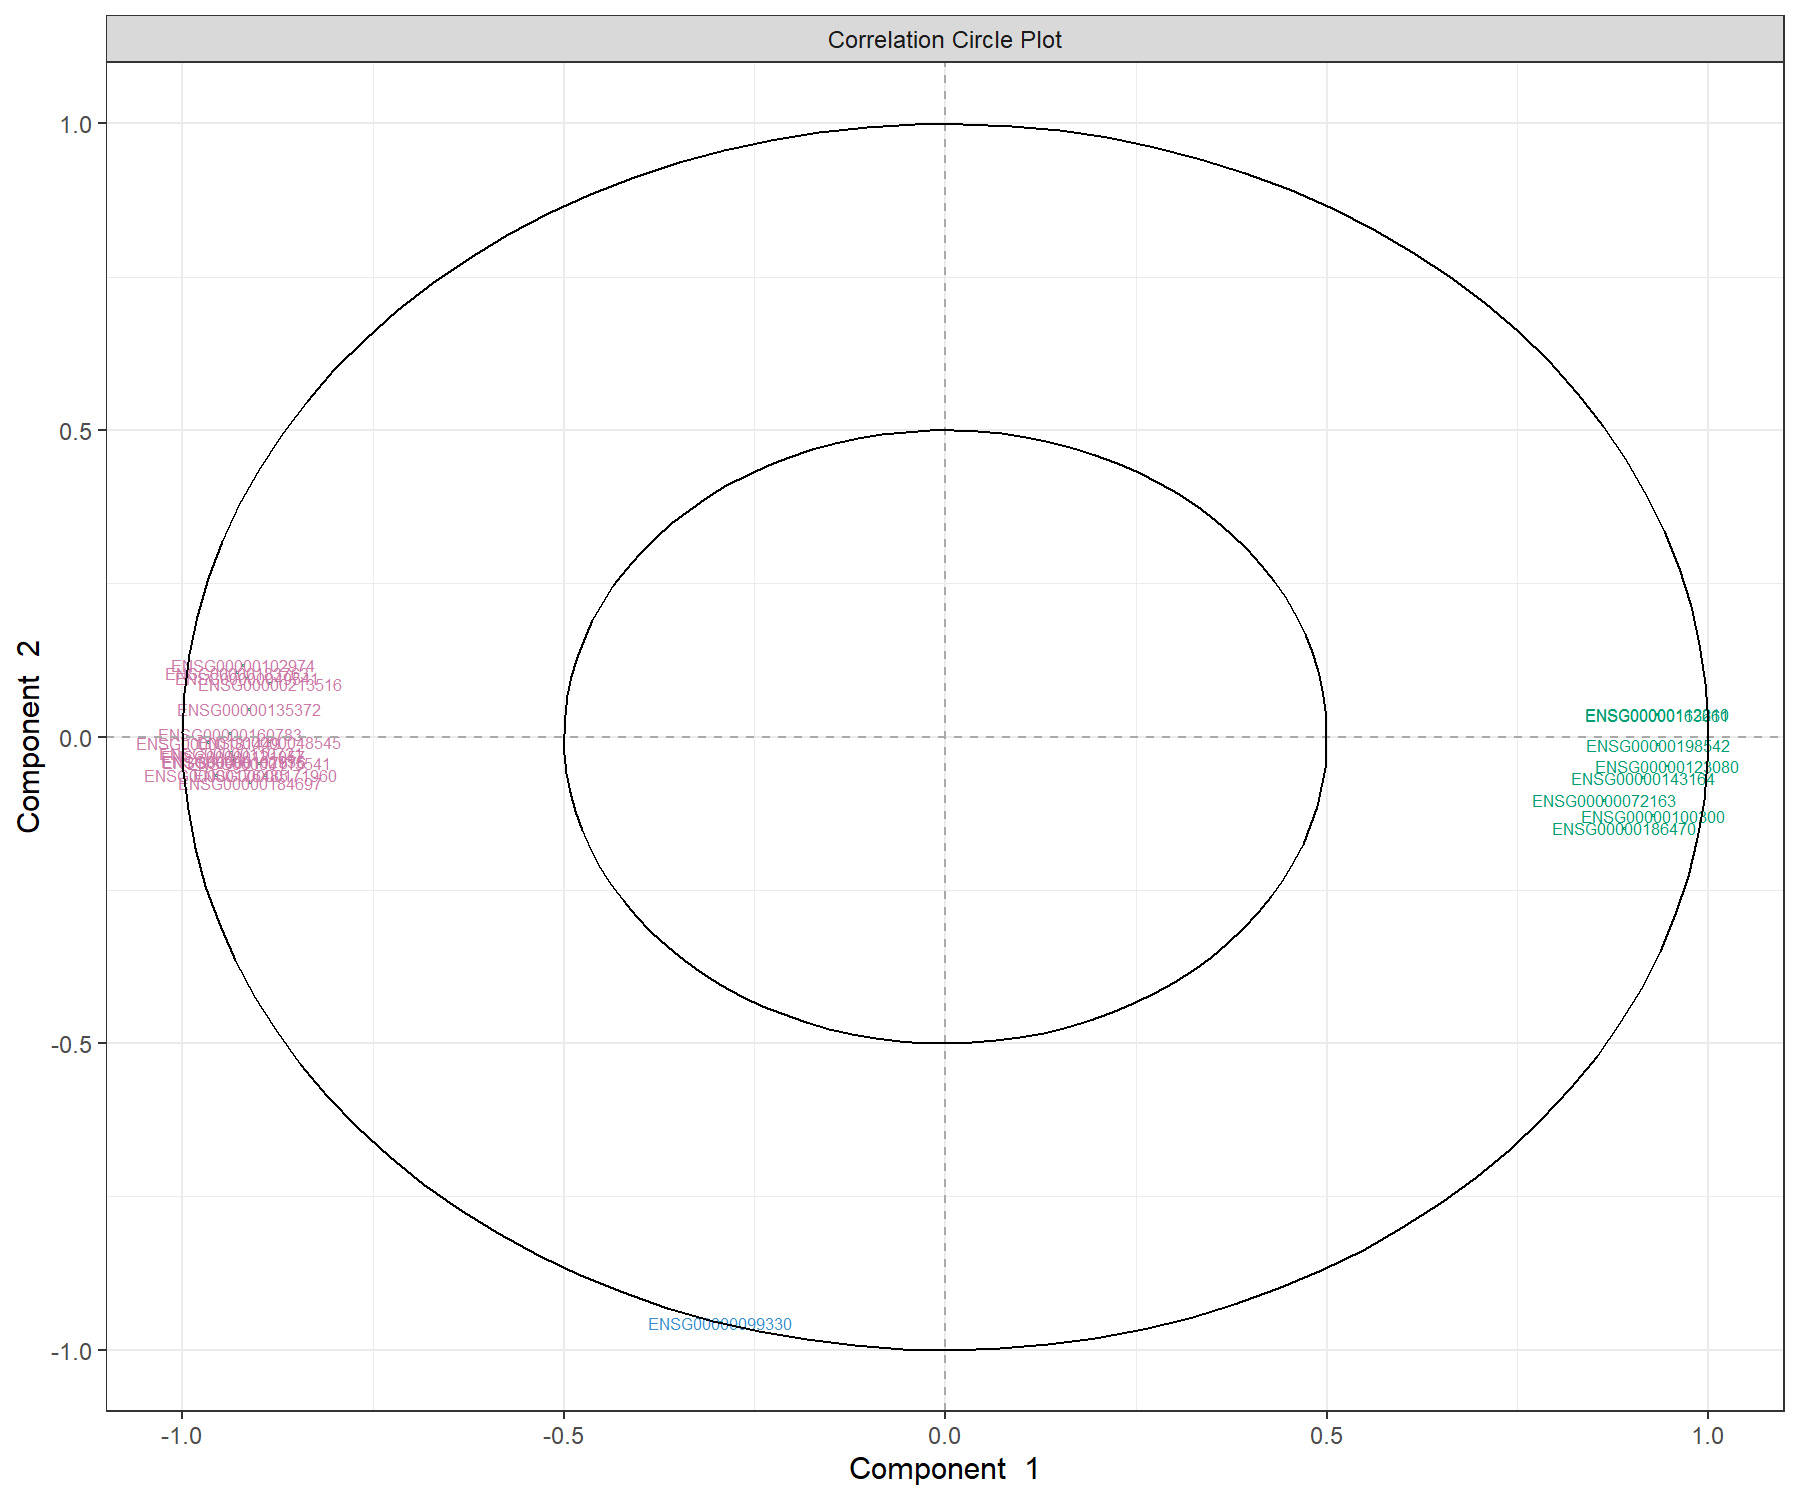 Correlation circle plot representing the genes selected by MINT sPLS-DA performed on the stemcells gene expression data to examine the association of the genes selected on the first two components. We mainly observe two groups of genes, either positively or negatively associated with component 1 along the x-axis. This graphic should be interpreted in conjunction with the sample plot.